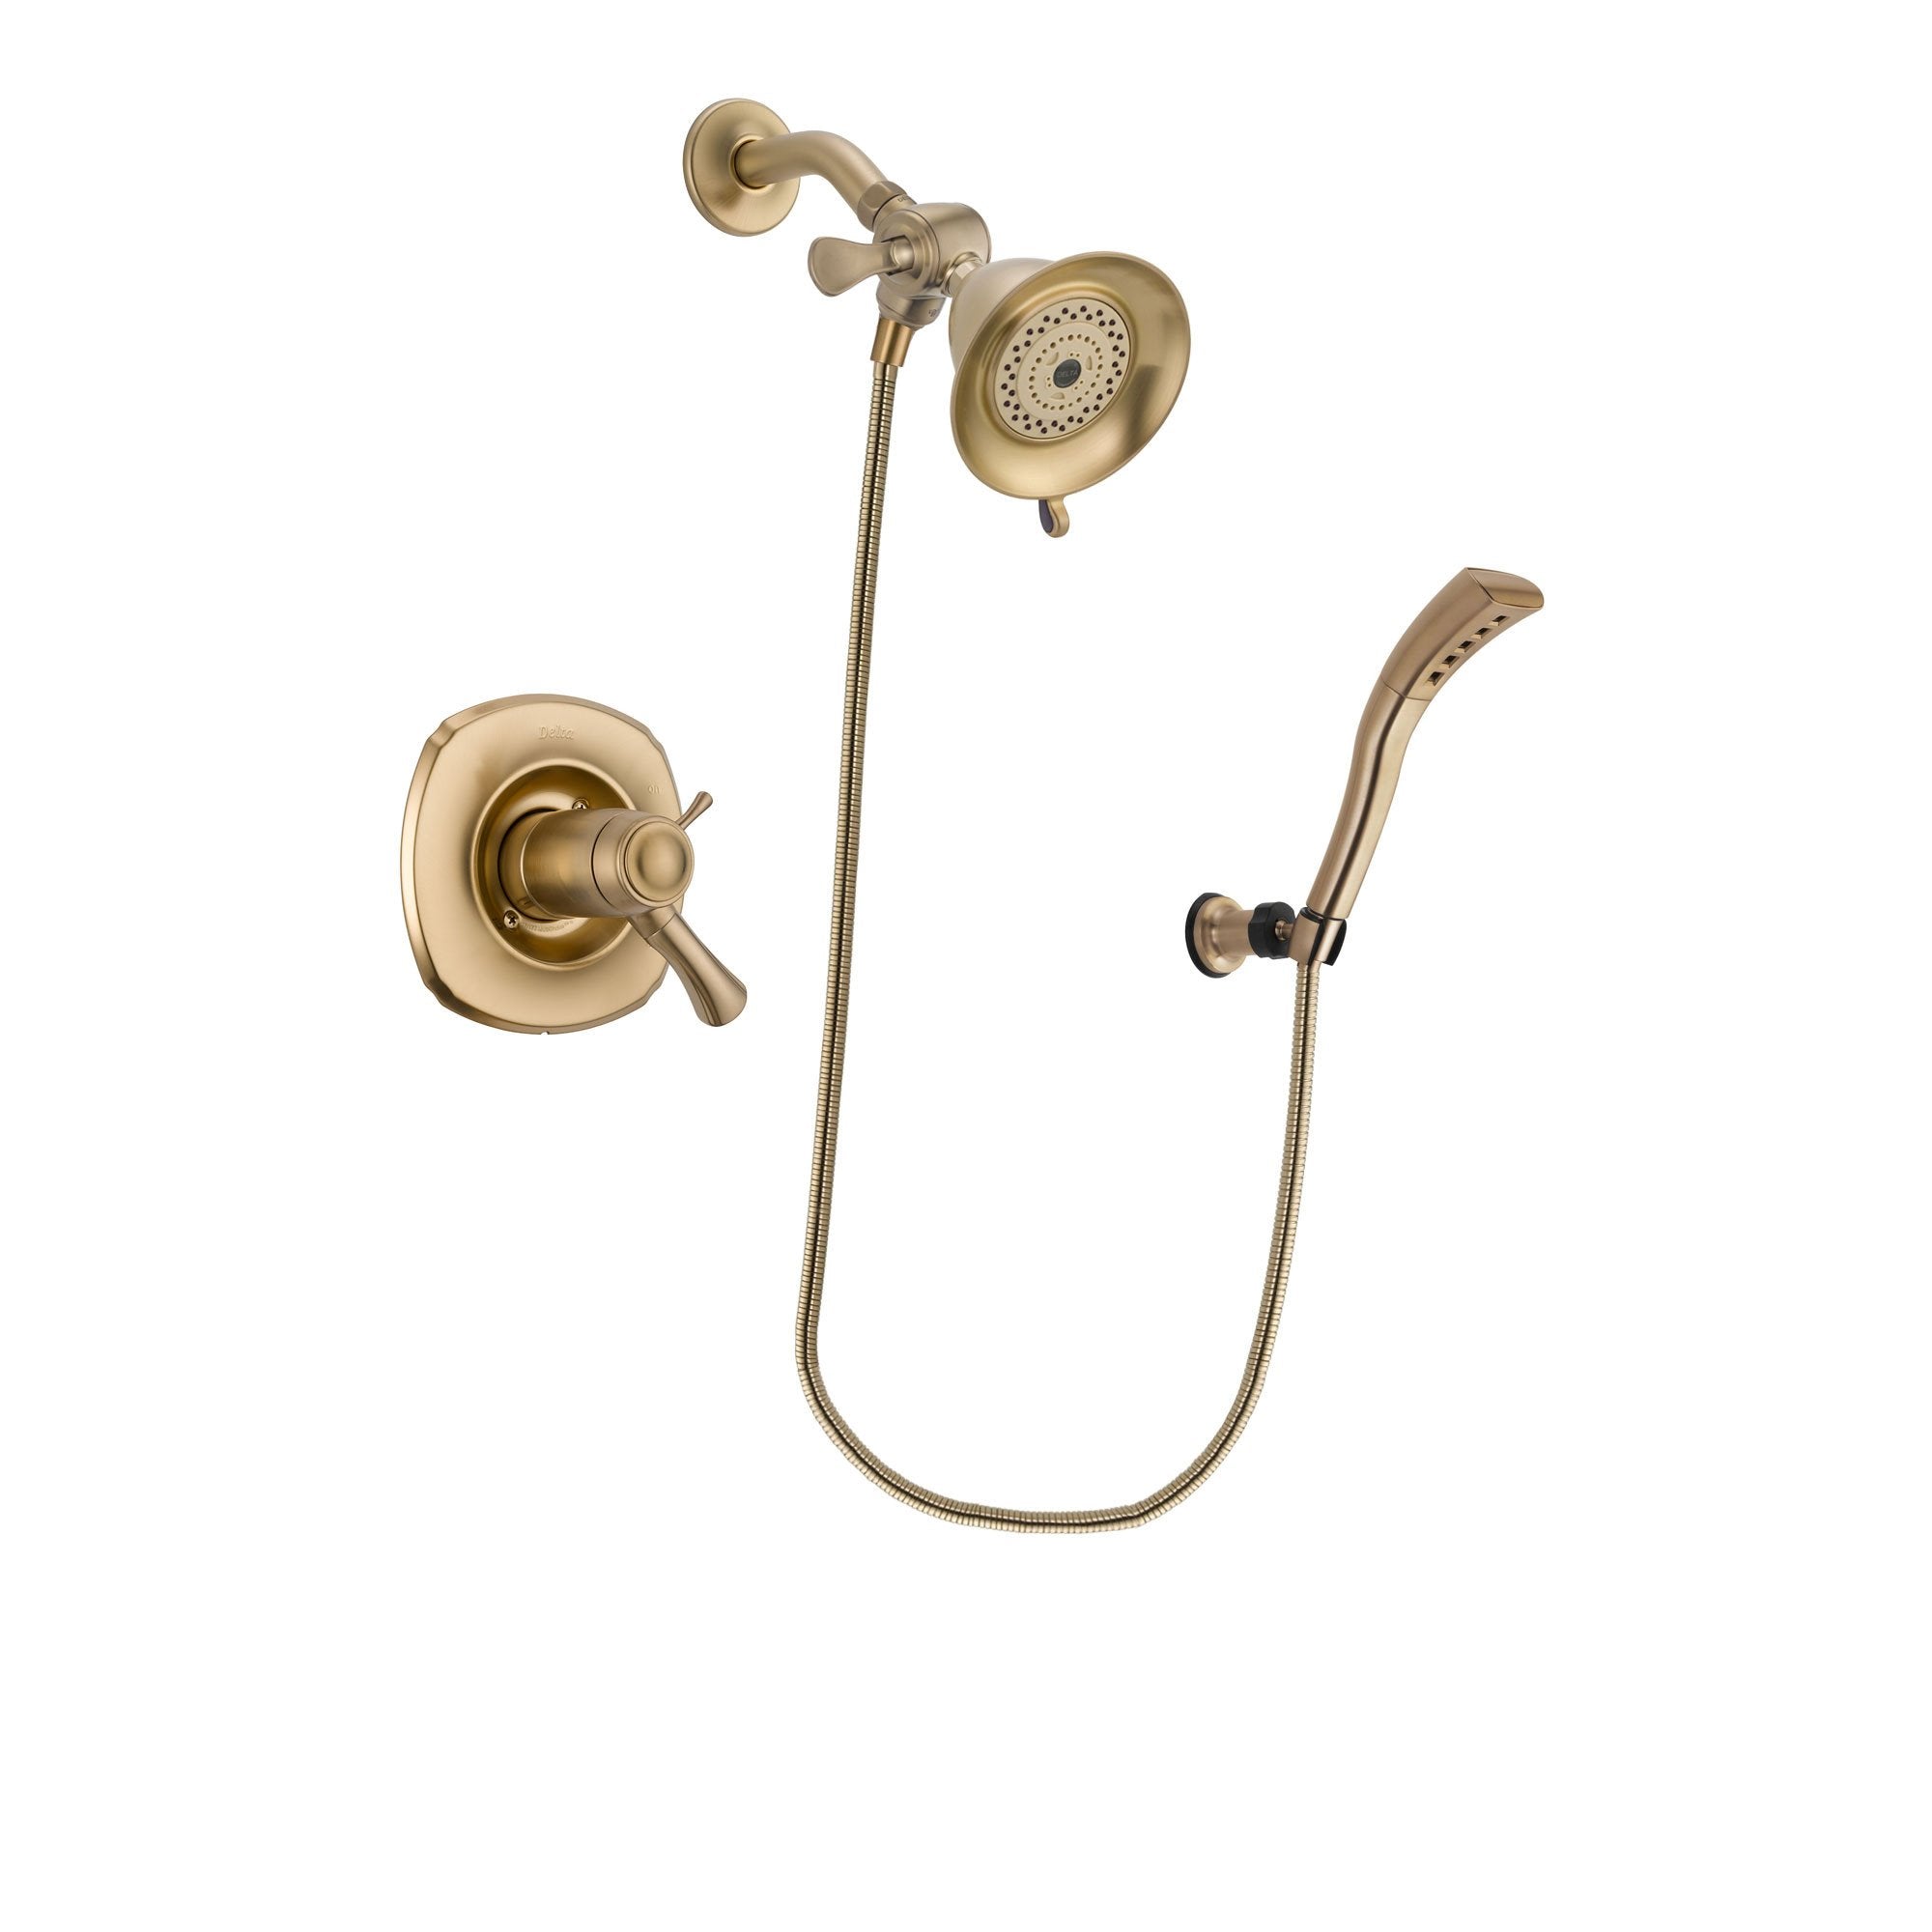 Delta Addison Champagne Bronze Finish Thermostatic Shower Faucet System Package with Water-Efficient Shower Head and Modern Wall Mount Personal Handheld Shower Spray Includes Rough-in Valve DSP3634V